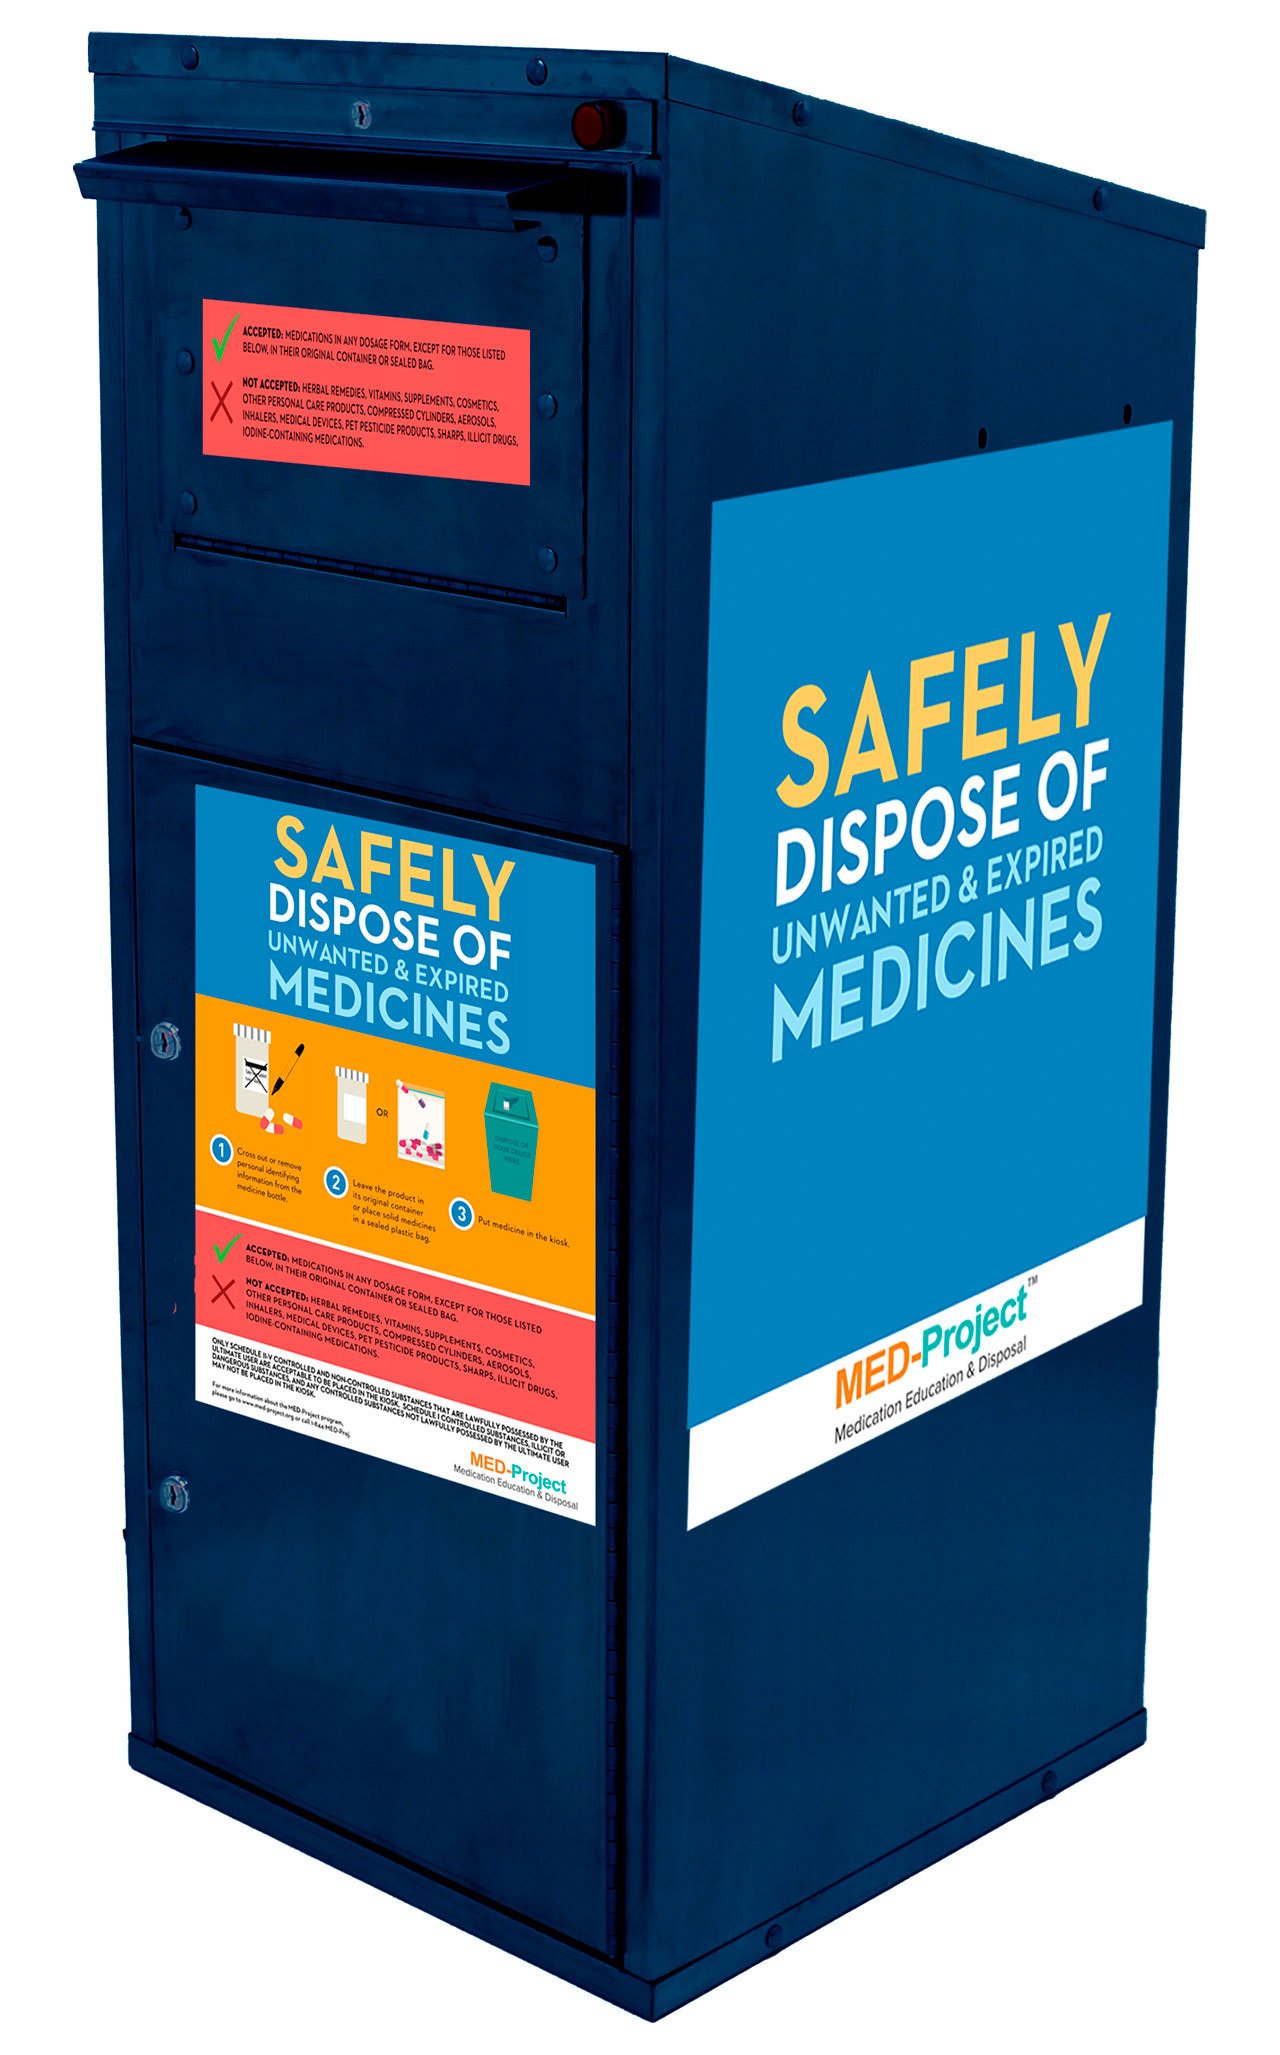 King County has launched a robust secure medicine return program. Now, residents can safely dispose of the medicines they no longer need by taking them to drop-boxes located throughout King County. COURTESY IMAGE, King County